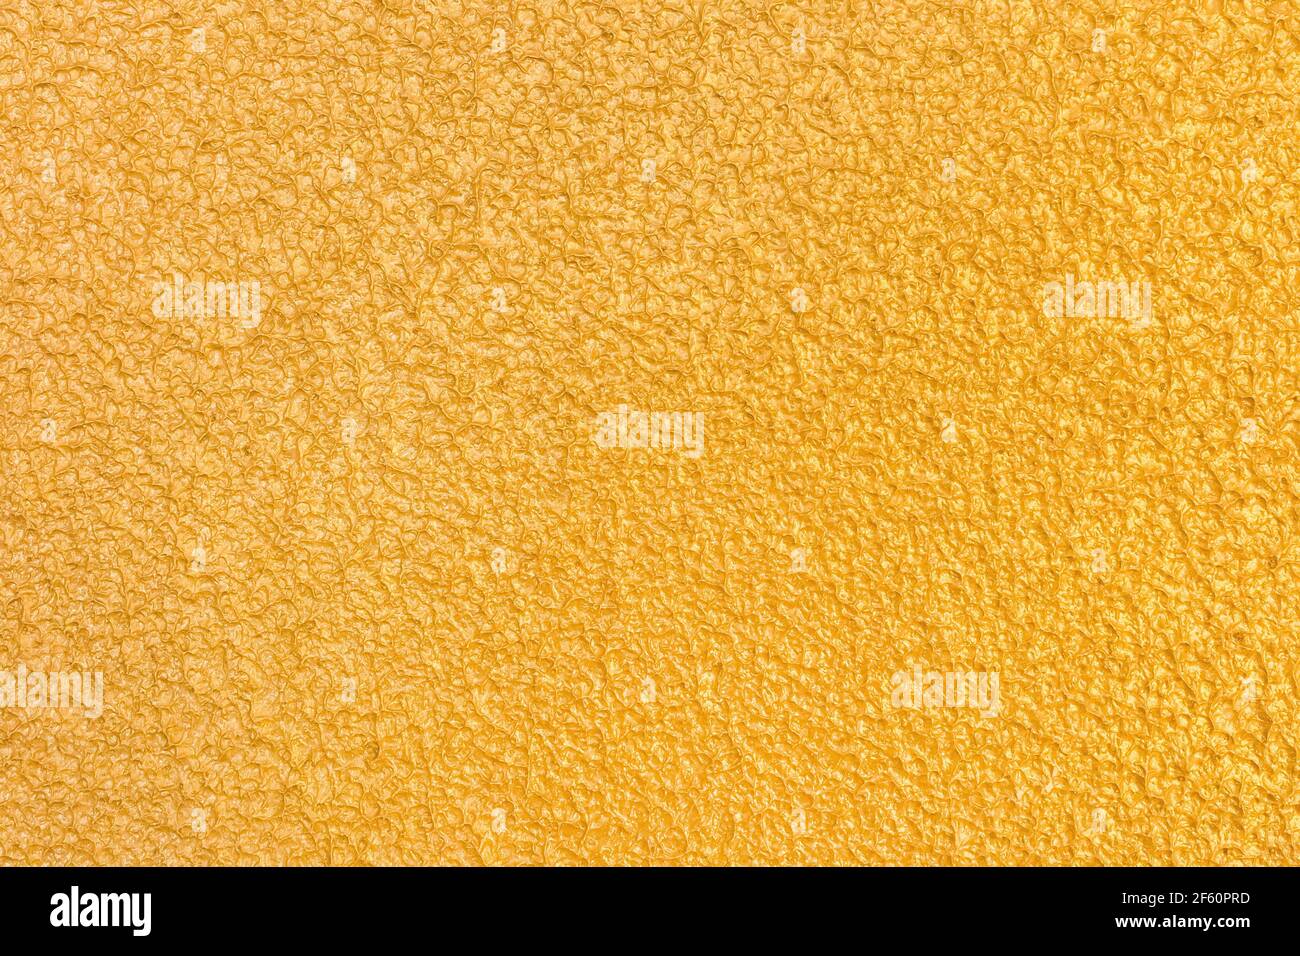 Abstract gold stucco wall texture, plaster yellow pattern background. Stock Photo